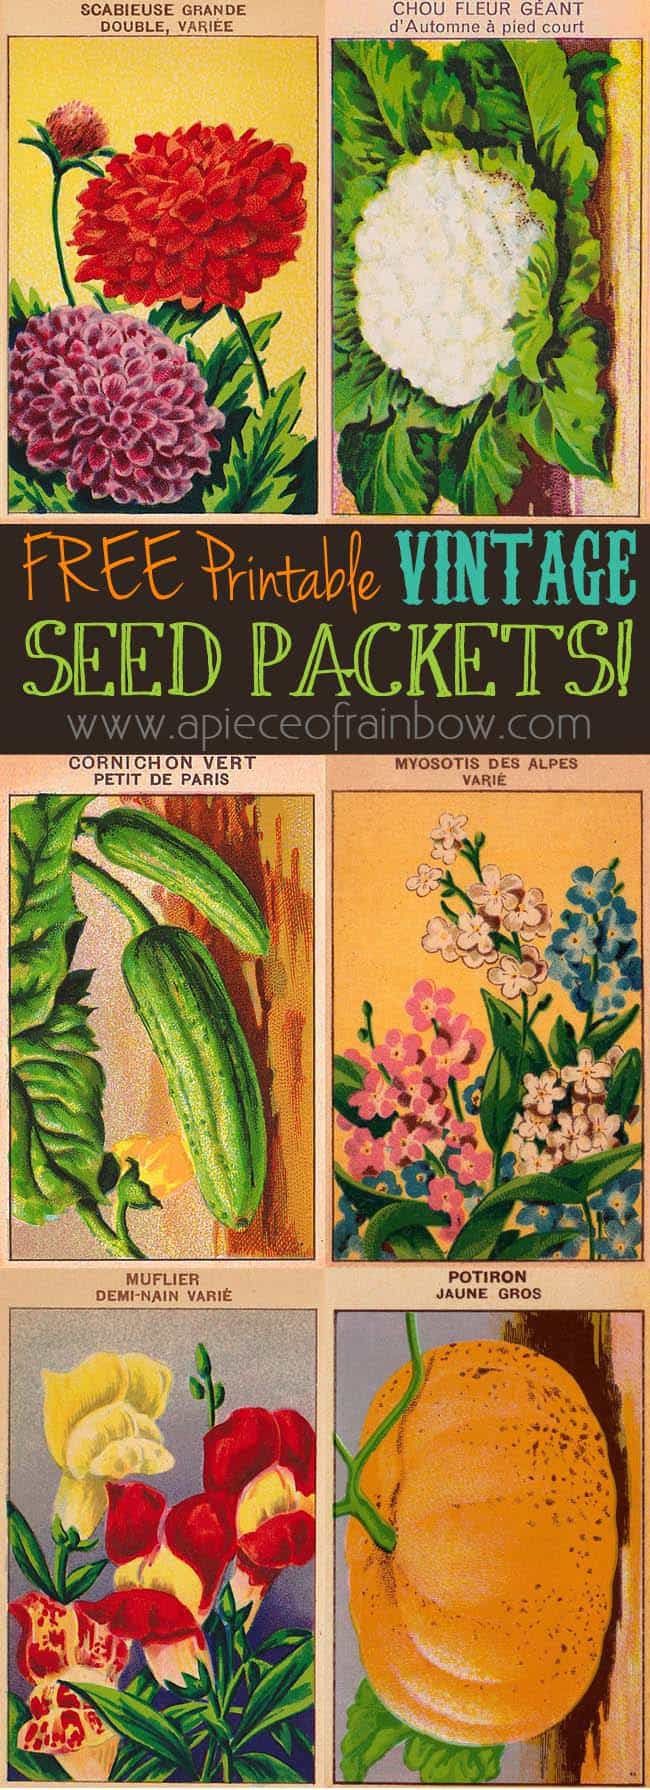 Free Printable Vintage French Seed Packets Wall Decor